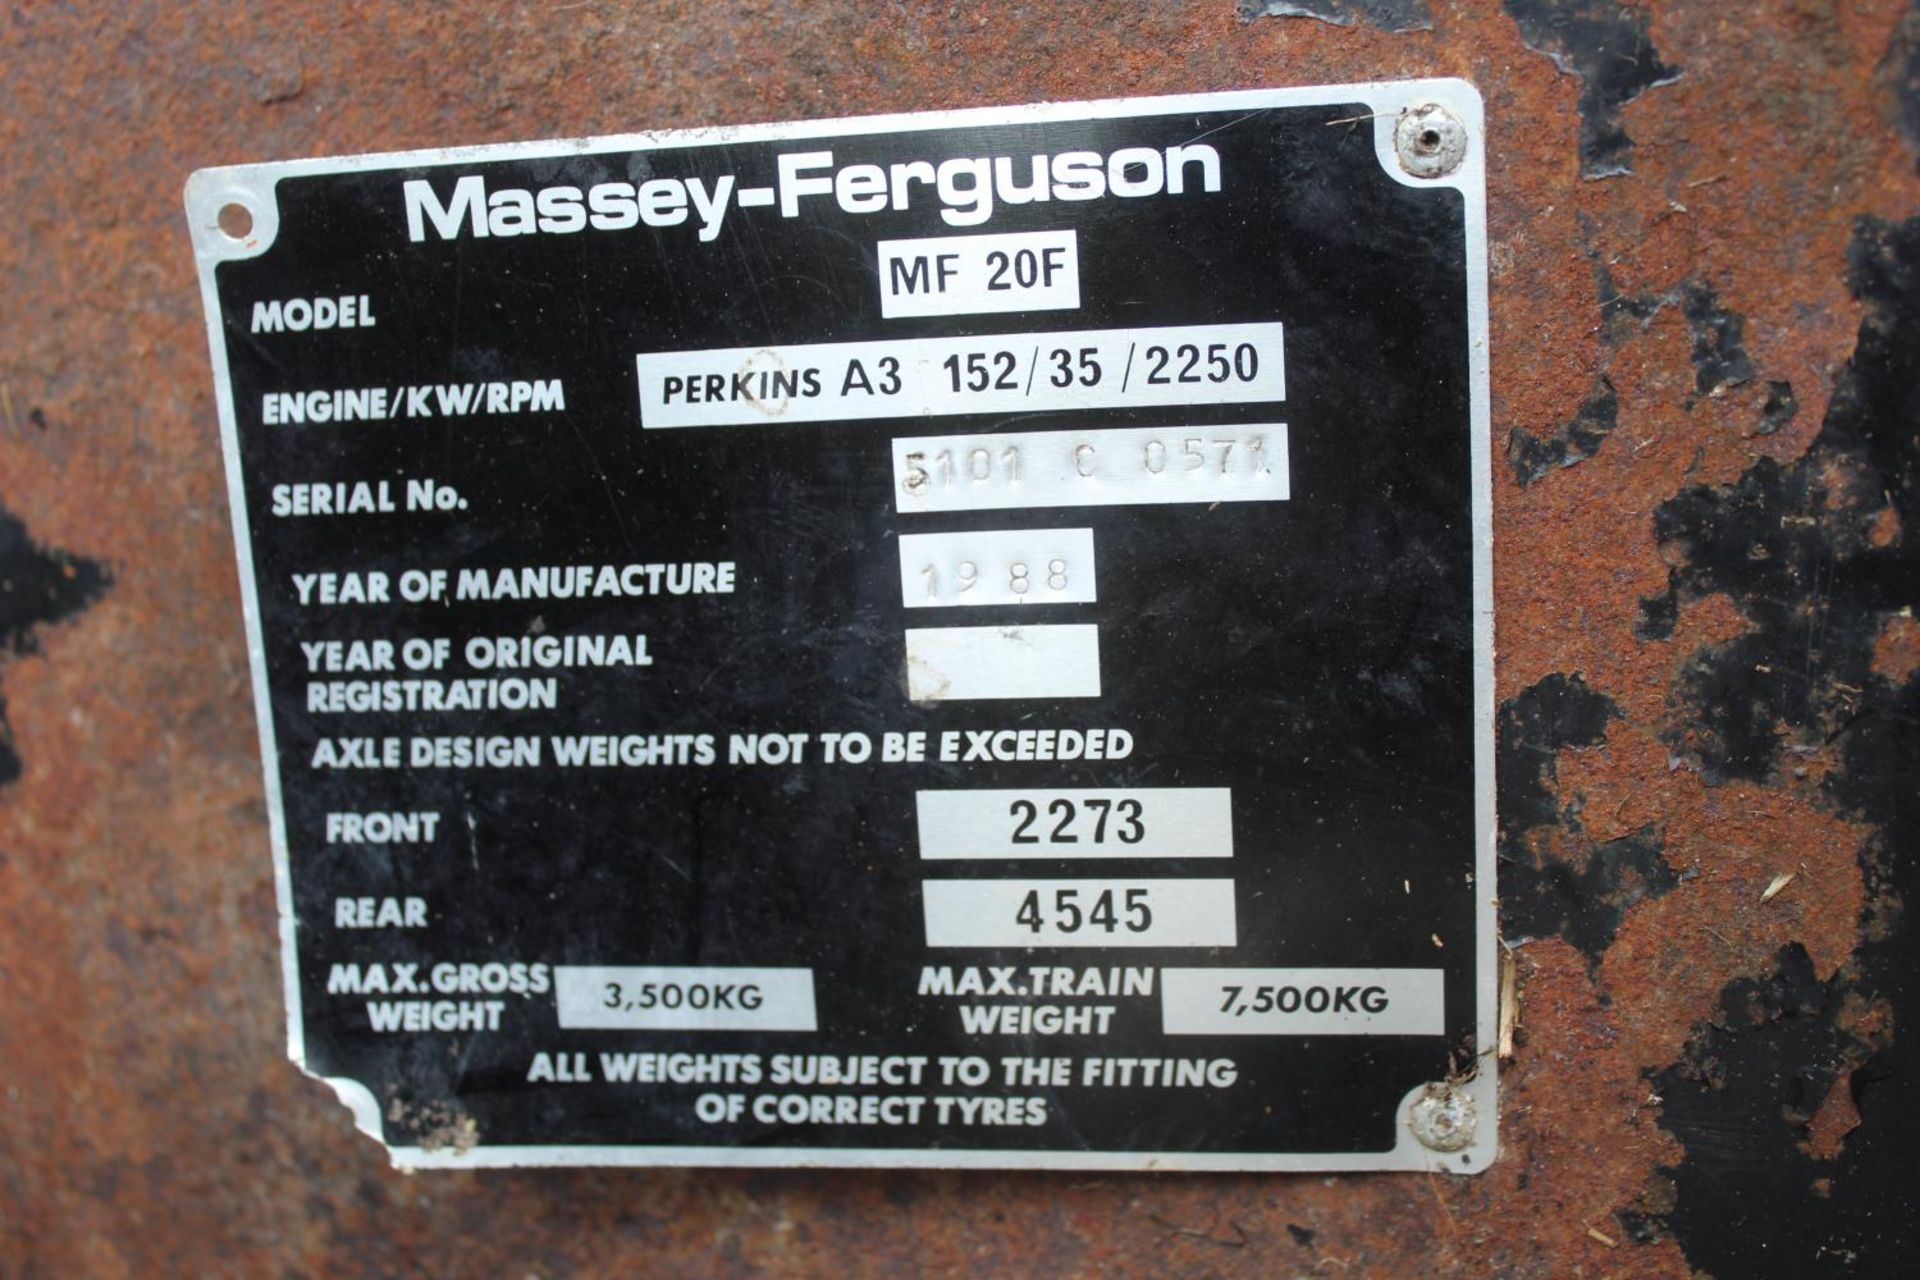 A MASSEY FERGUSON 20F 2WD INDUSTRIAL TRACTOR NO V5 SERIAL NUMBER 5101 C 0571 BELIEVED 1988 ONE OWNER - Image 8 of 9